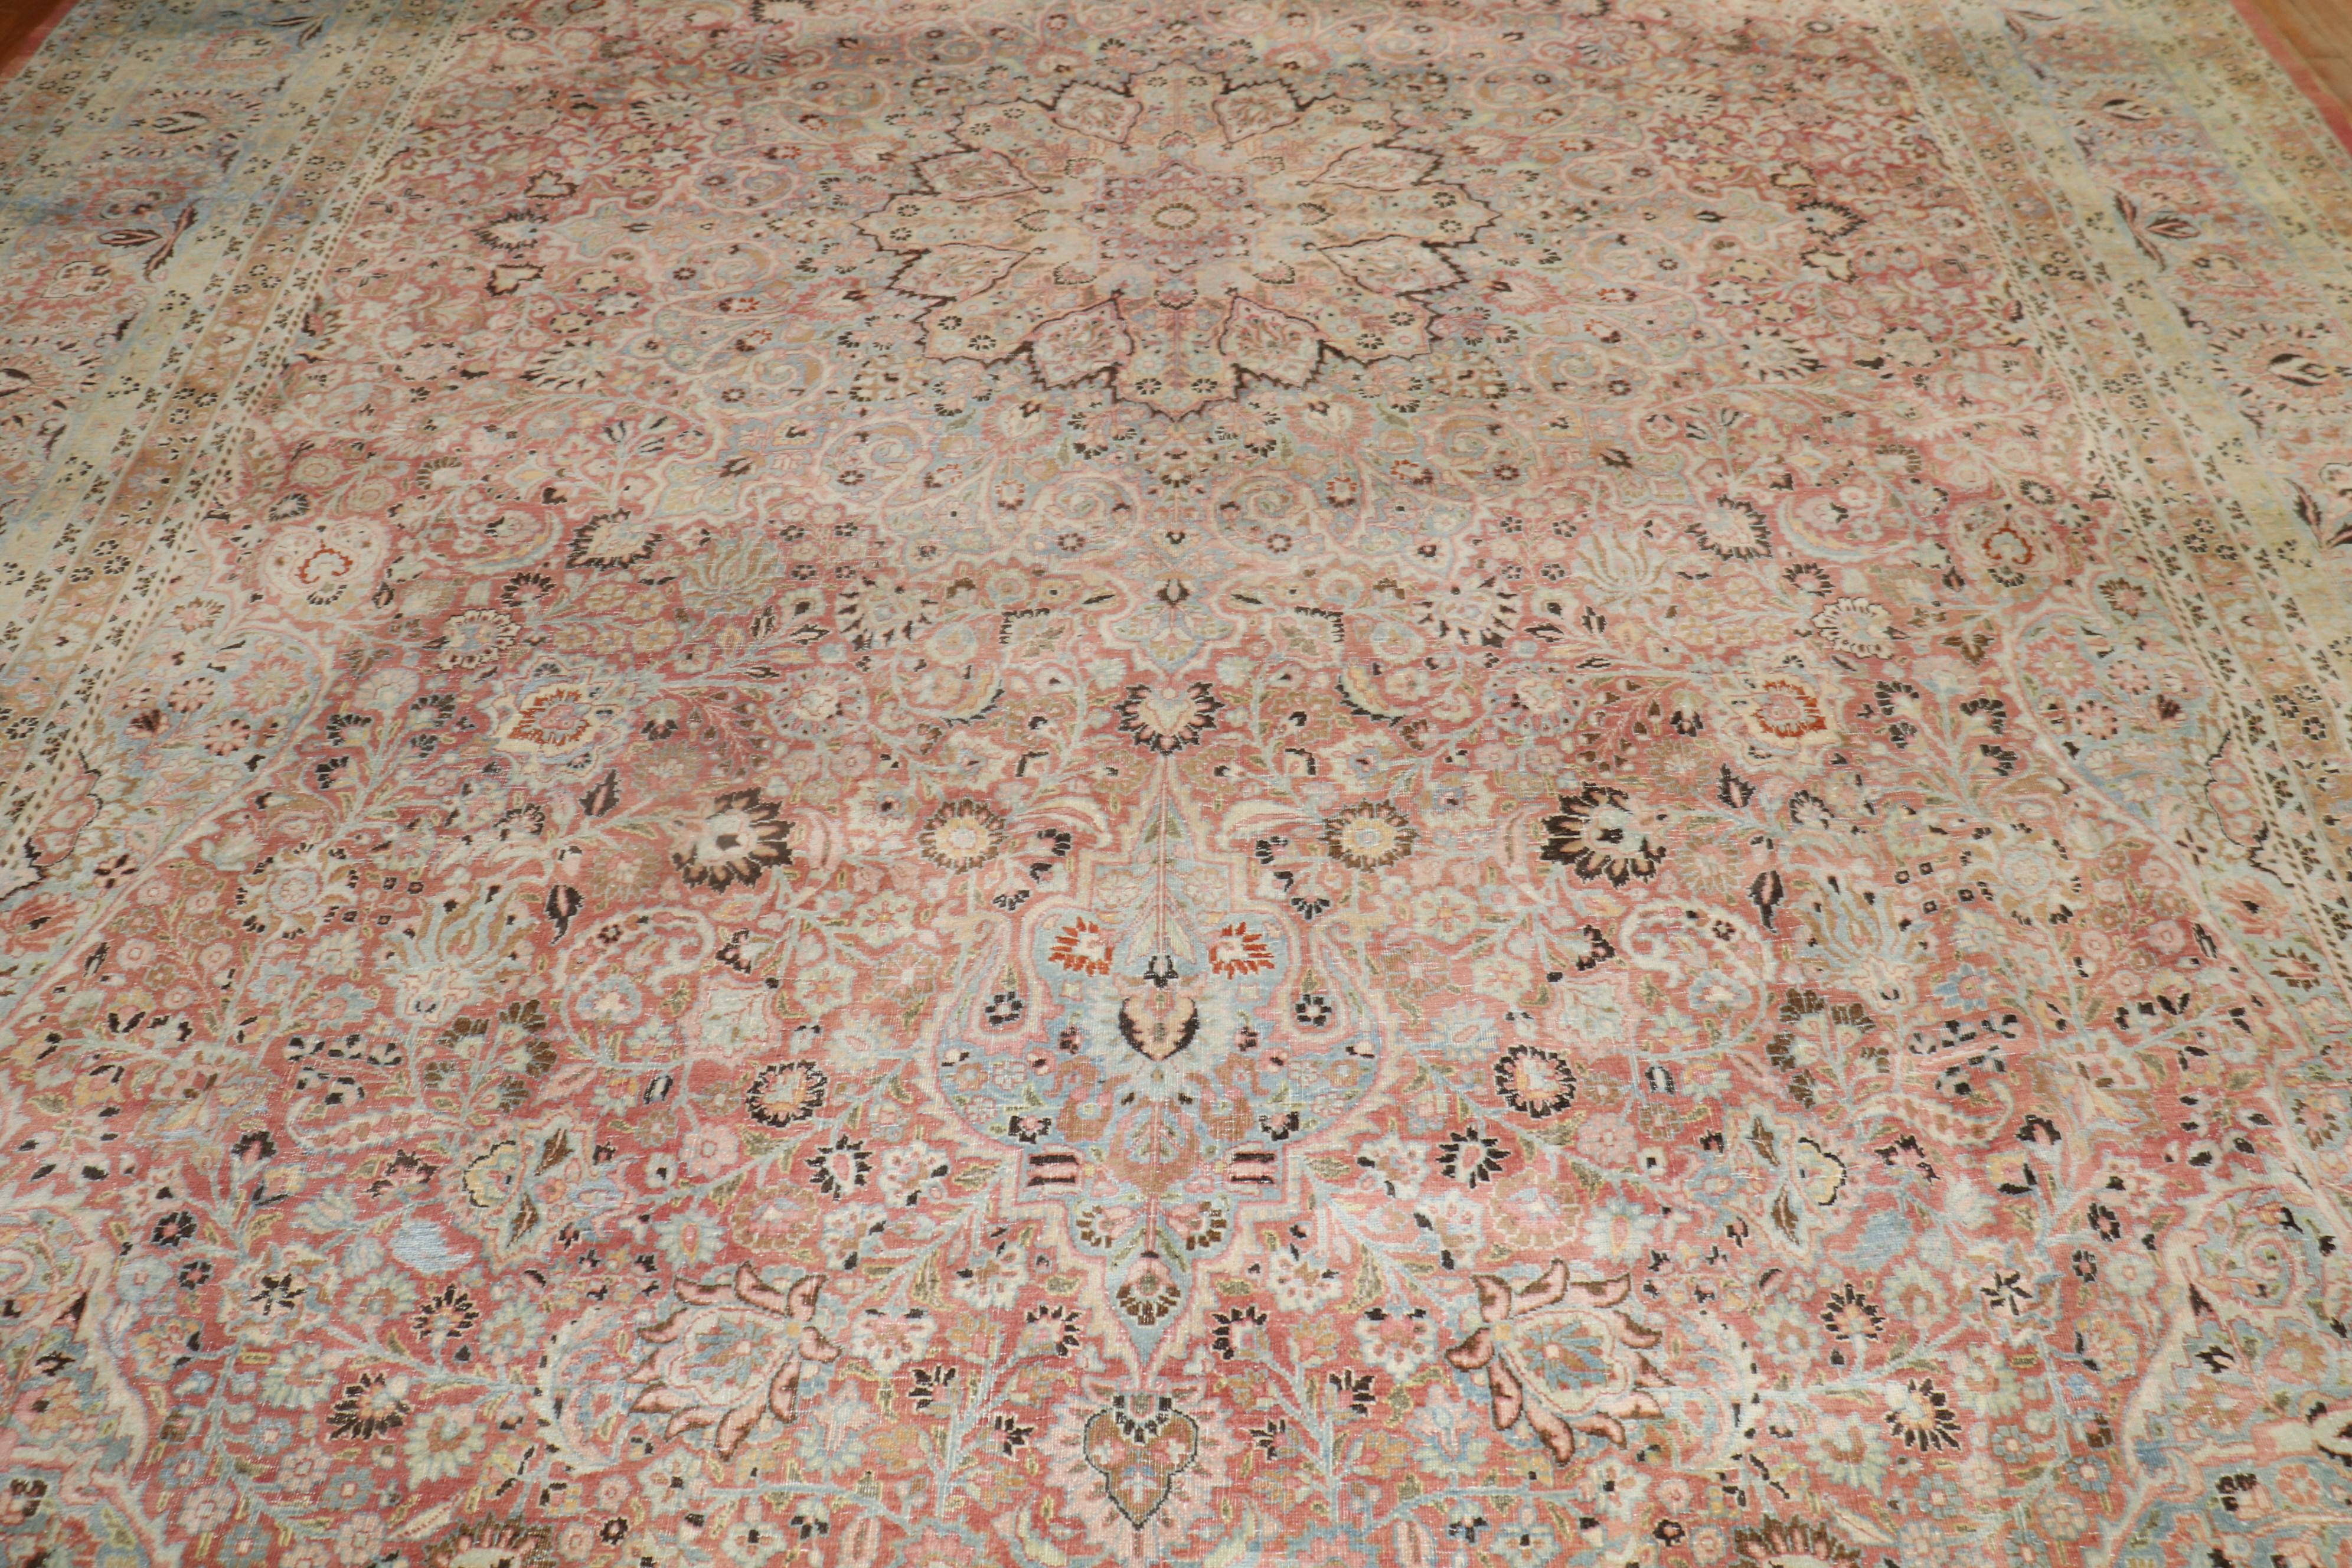 An oversize Formal Persian Meshed rug from the early 20th century.

Measures: 11'2'' x 19'

